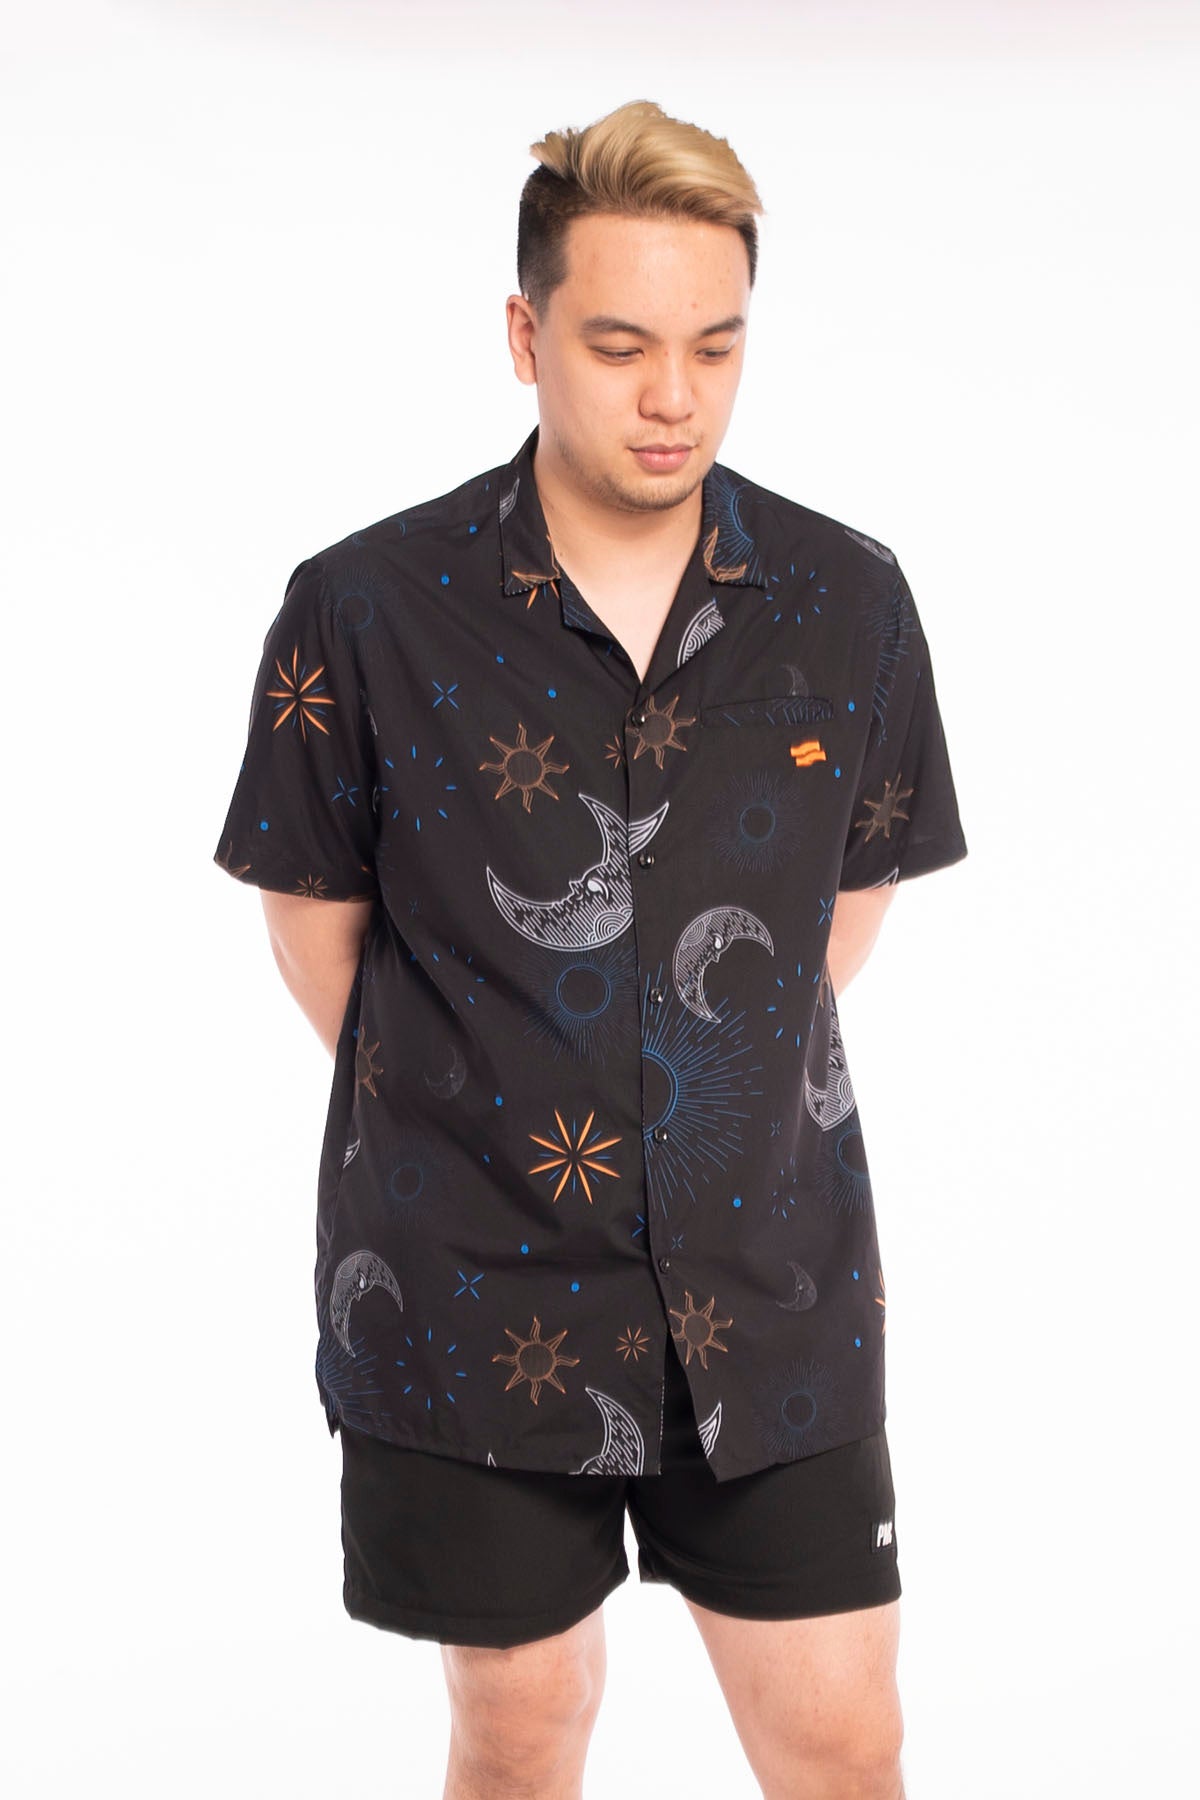 PMC x SHALS Blessings In The Skies Bowling Shirt Black